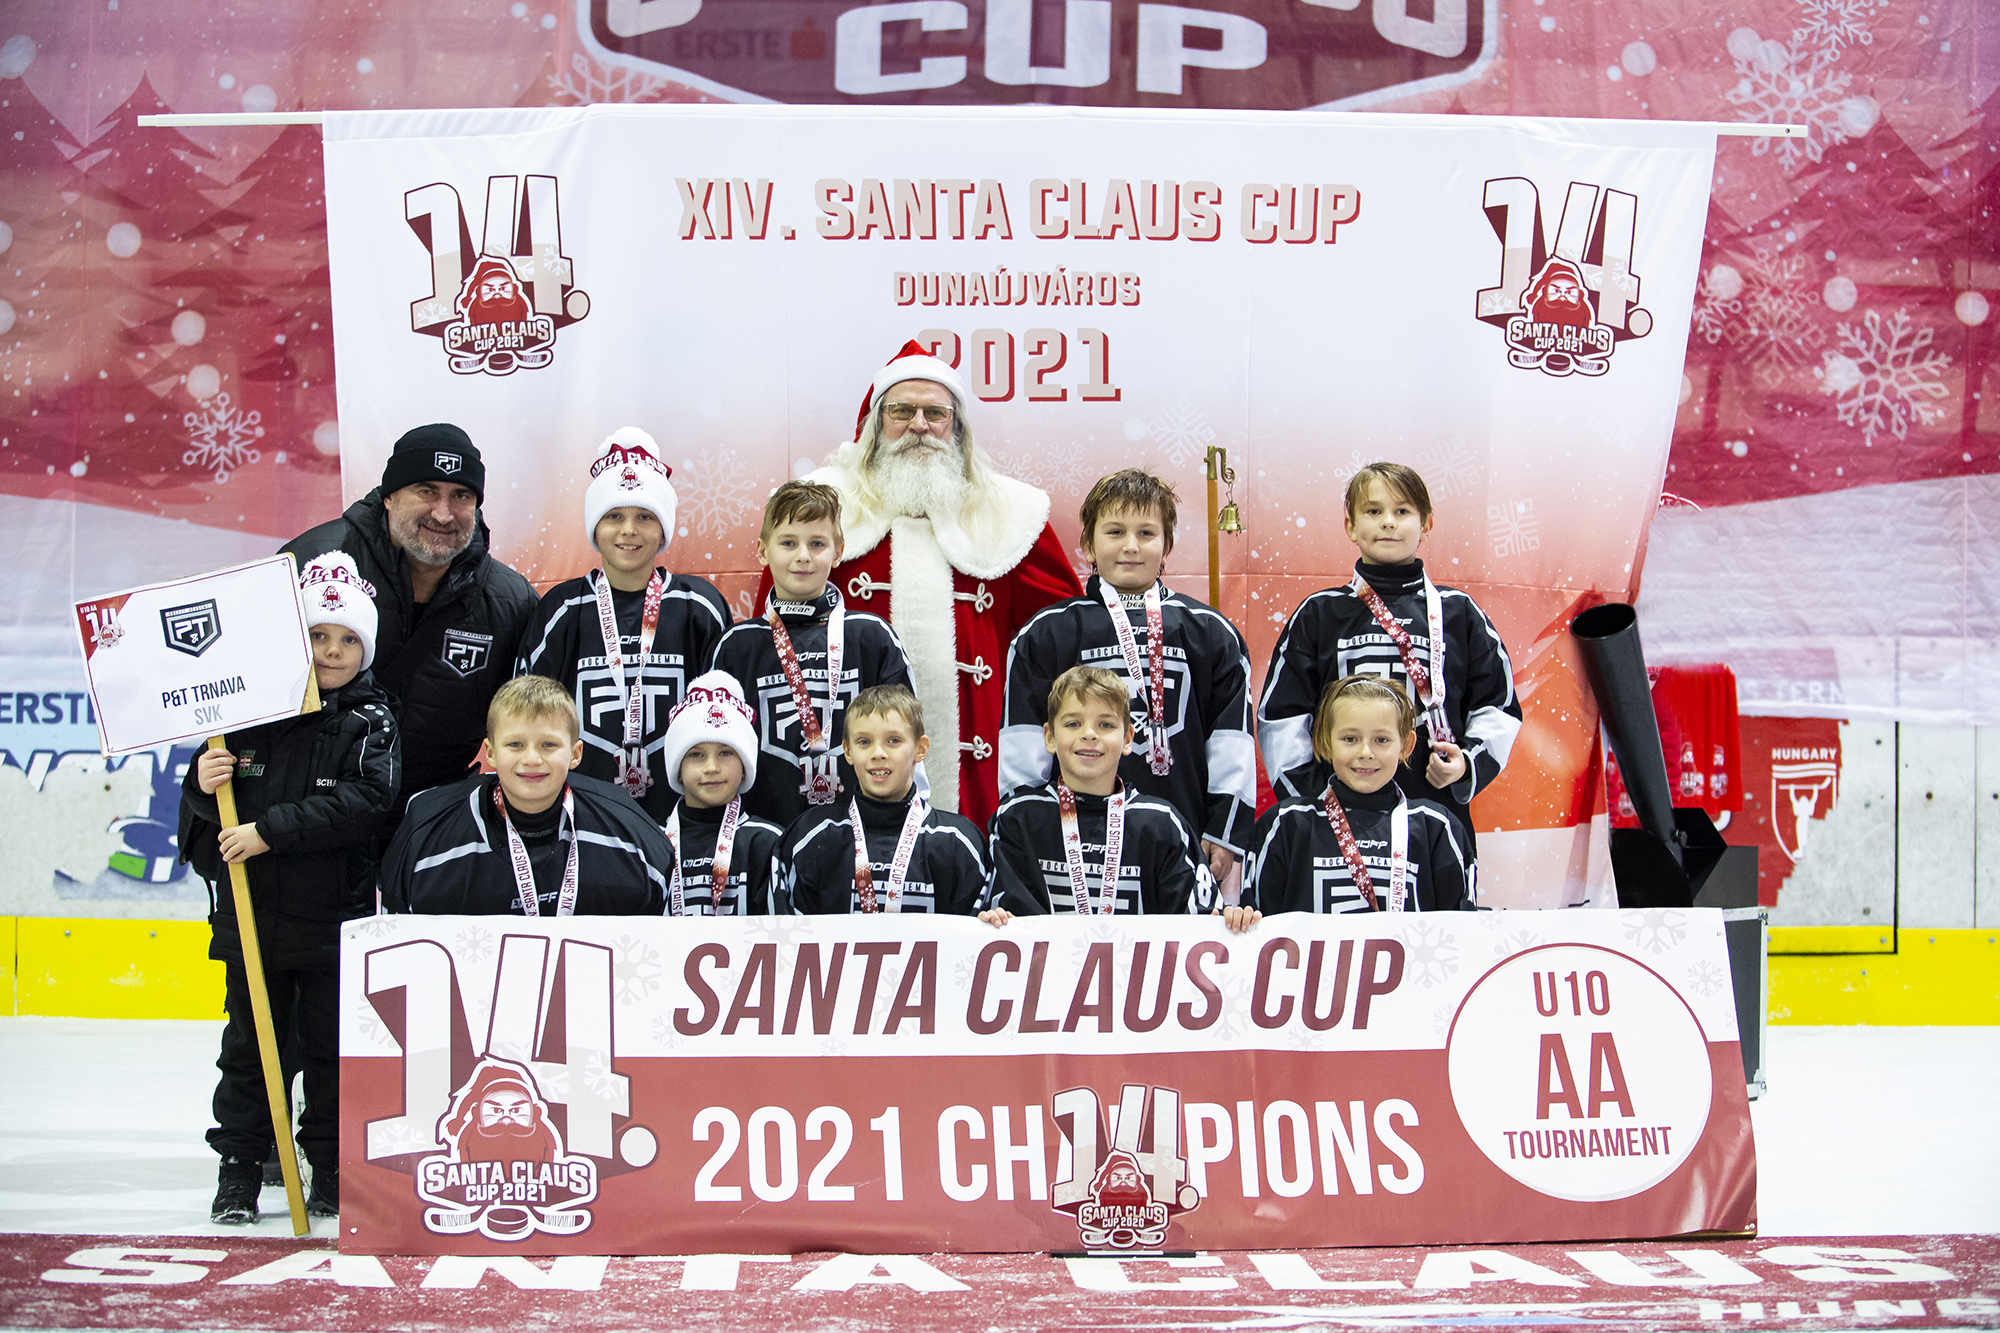 P&T Trnava wins the AA category of the 14th Santa Claus Cup